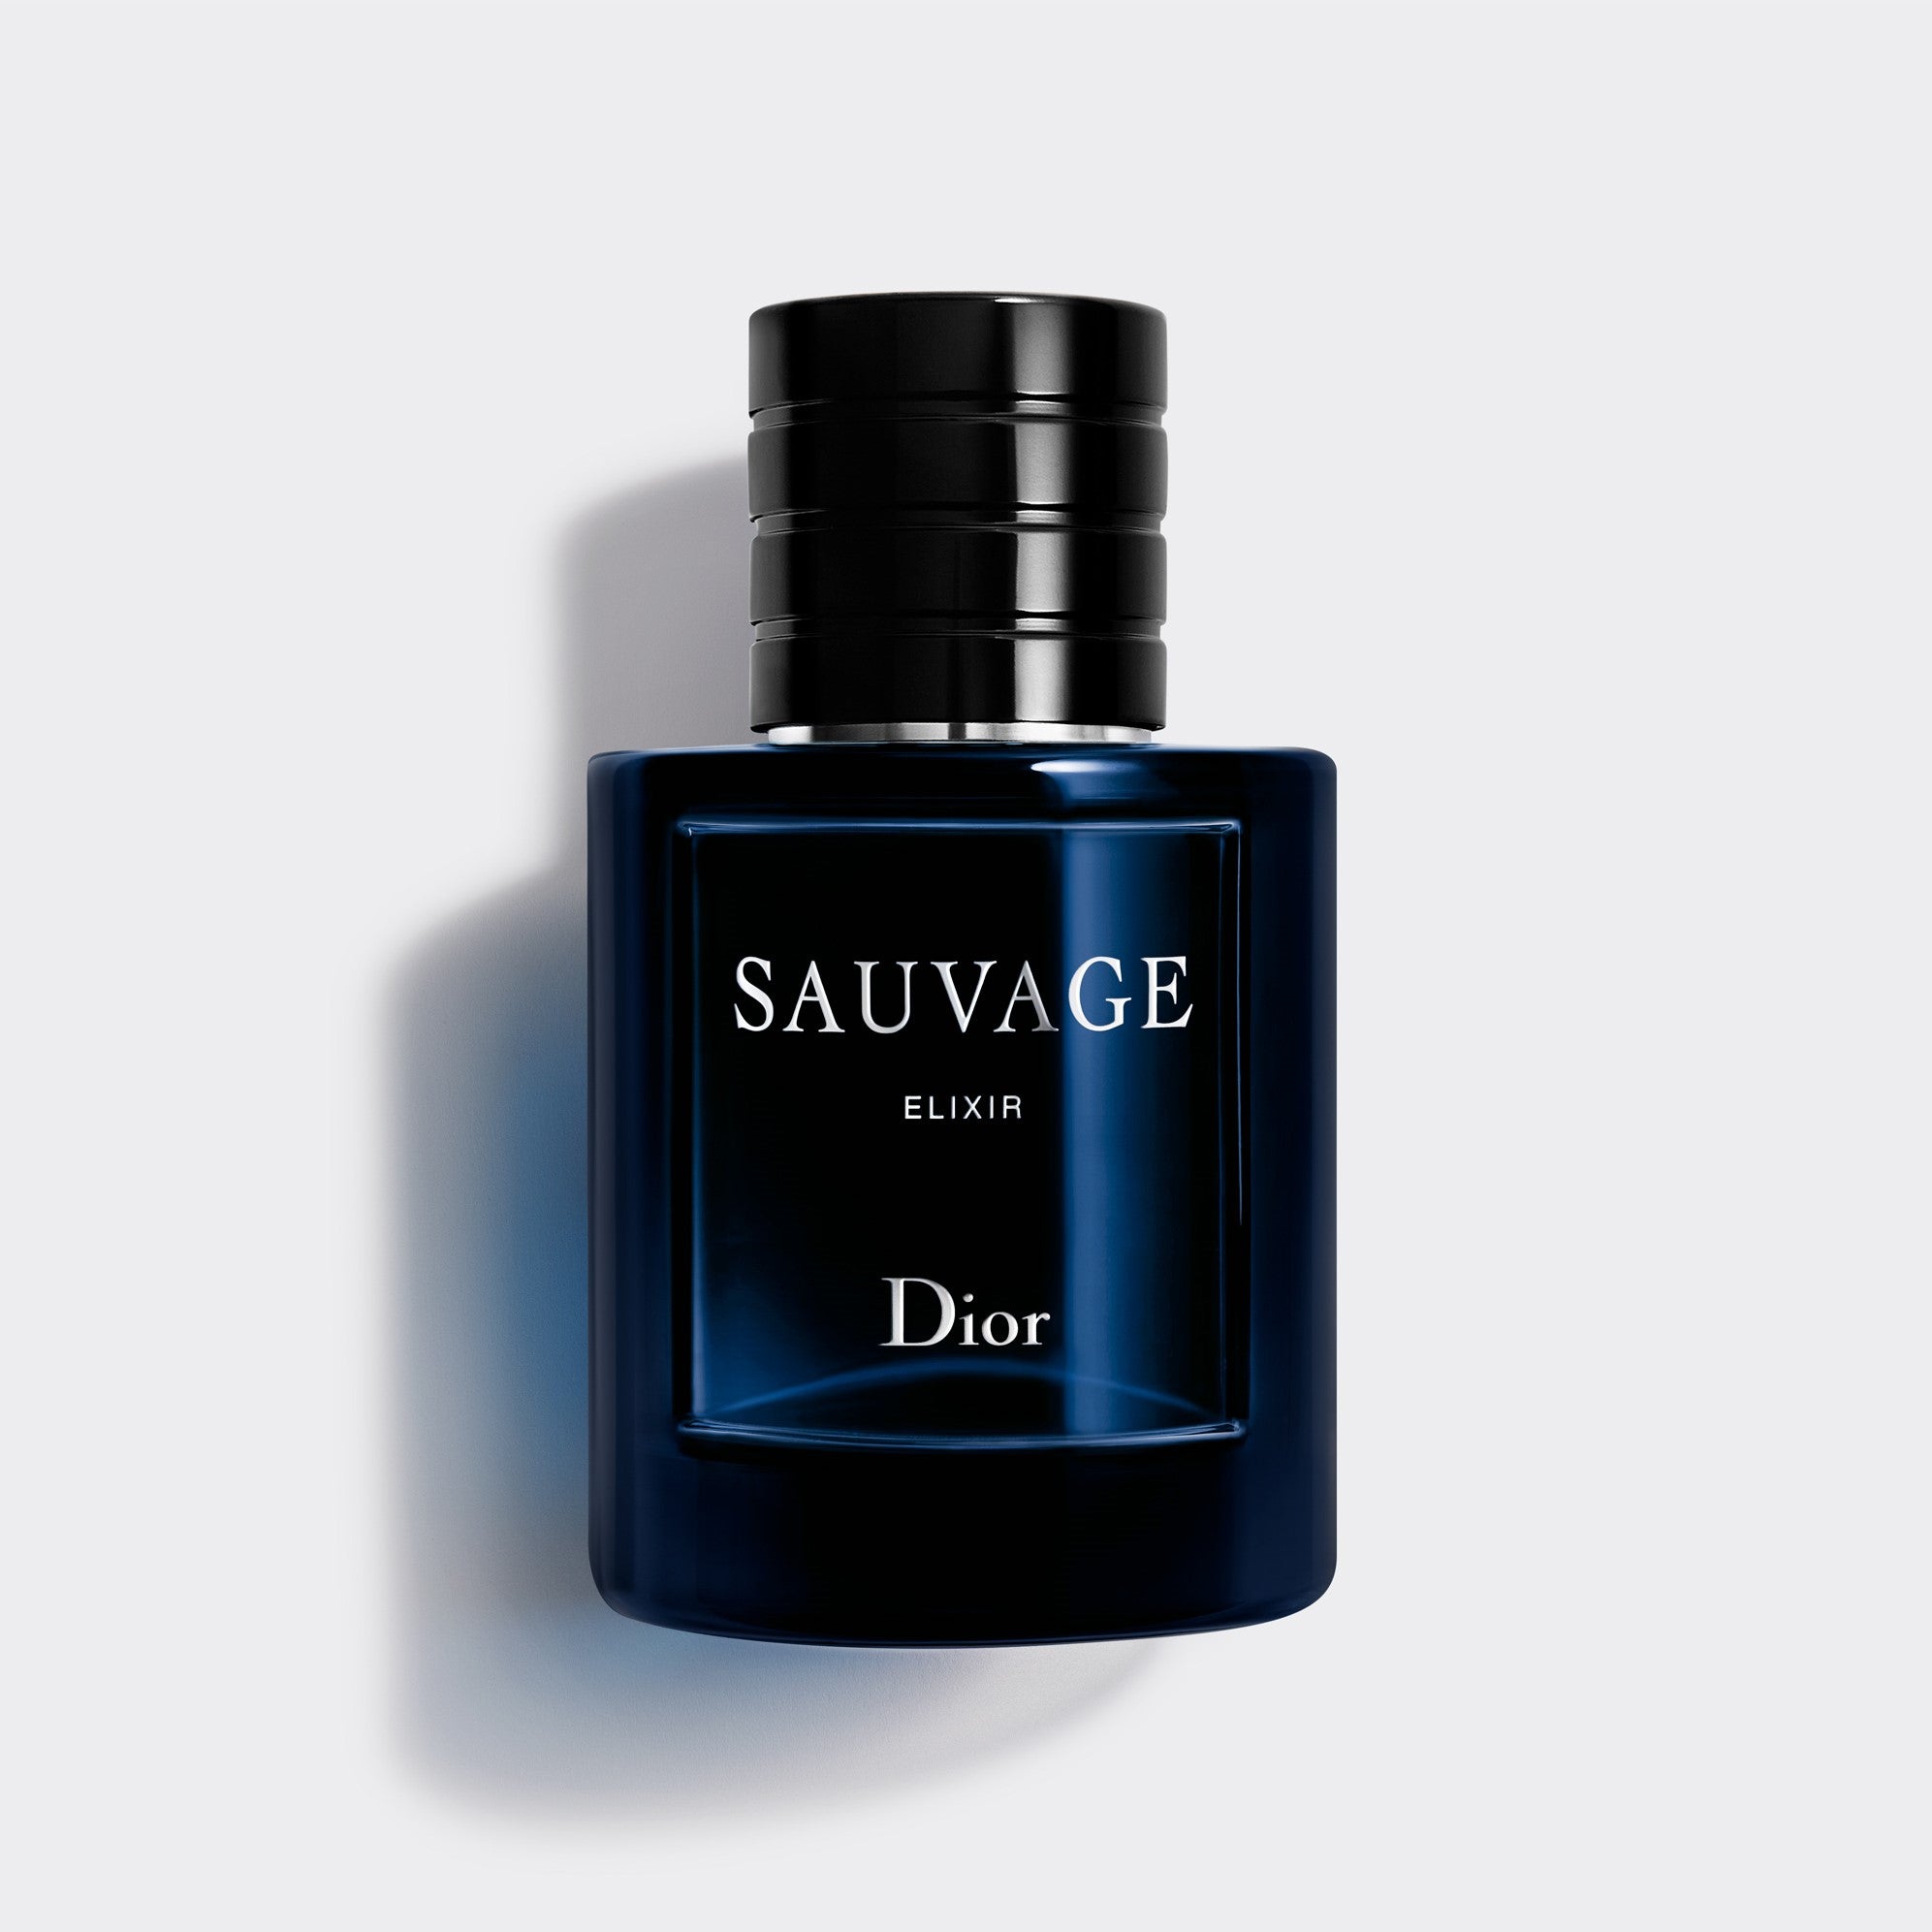 SAUVAGE ELIXIR ~ Elixir - Spicy, Fresh and Woody Notes – Dior Beauty